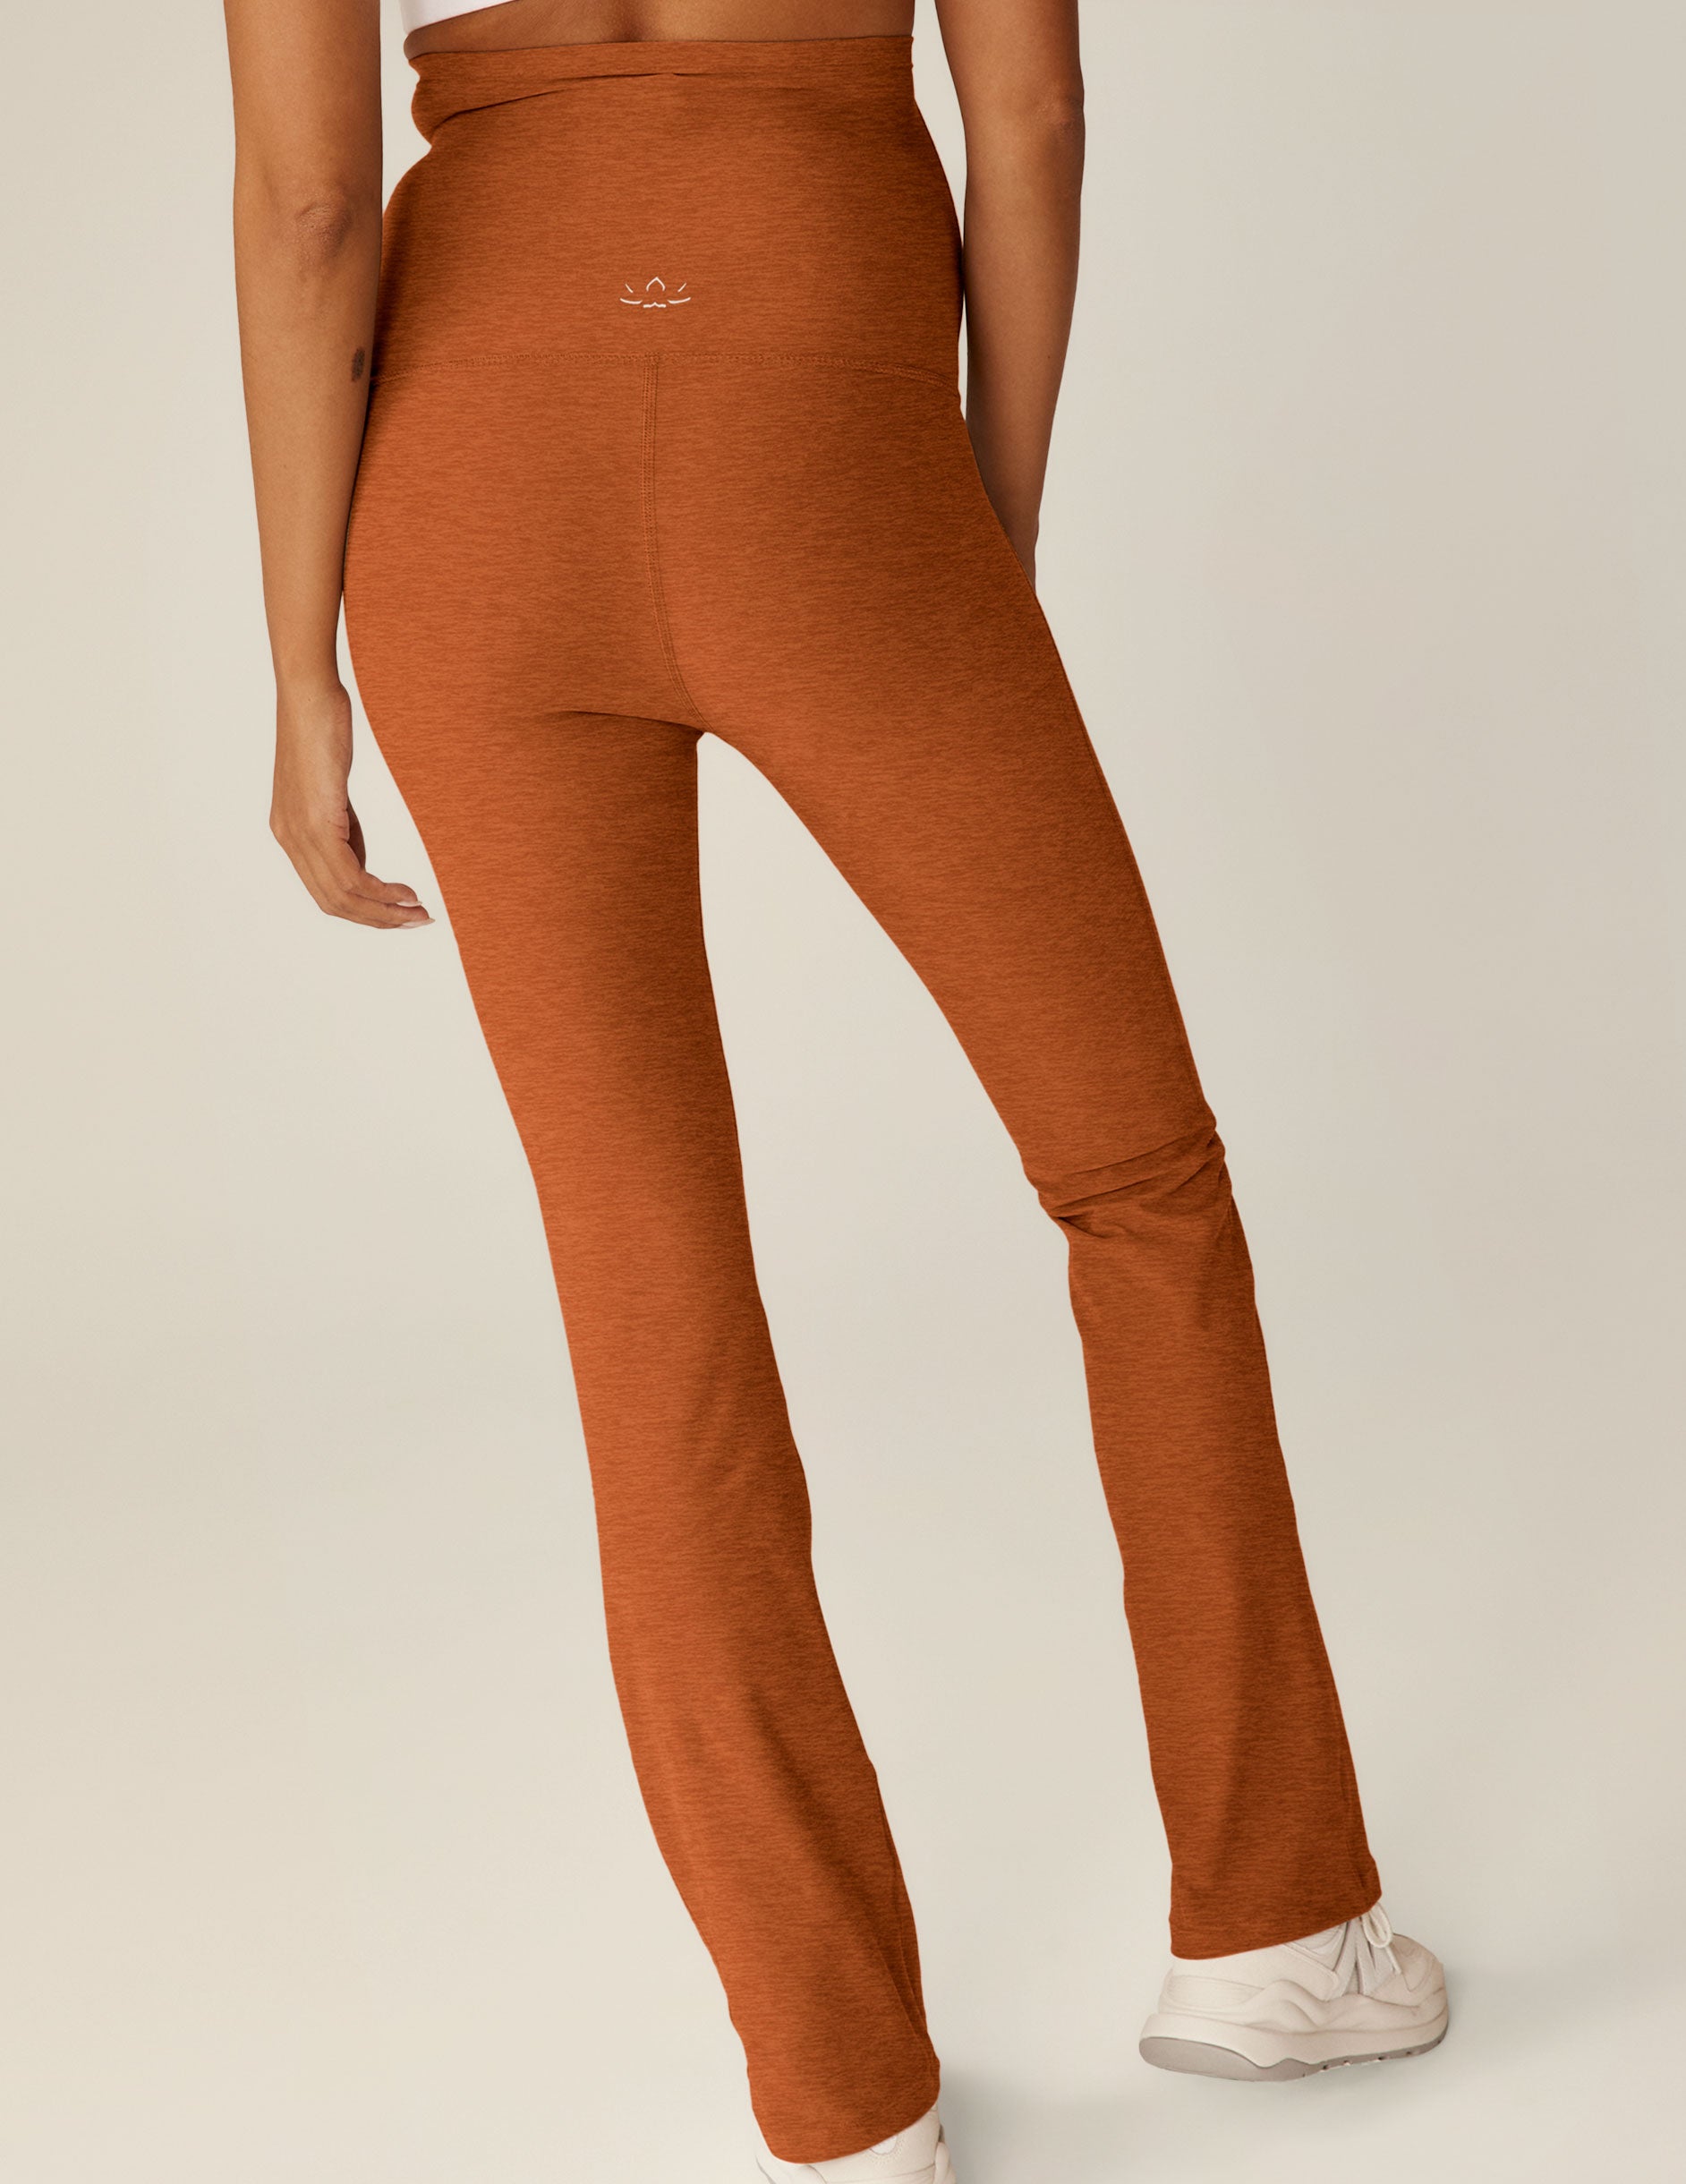 brown bootcut style maternity pants. 